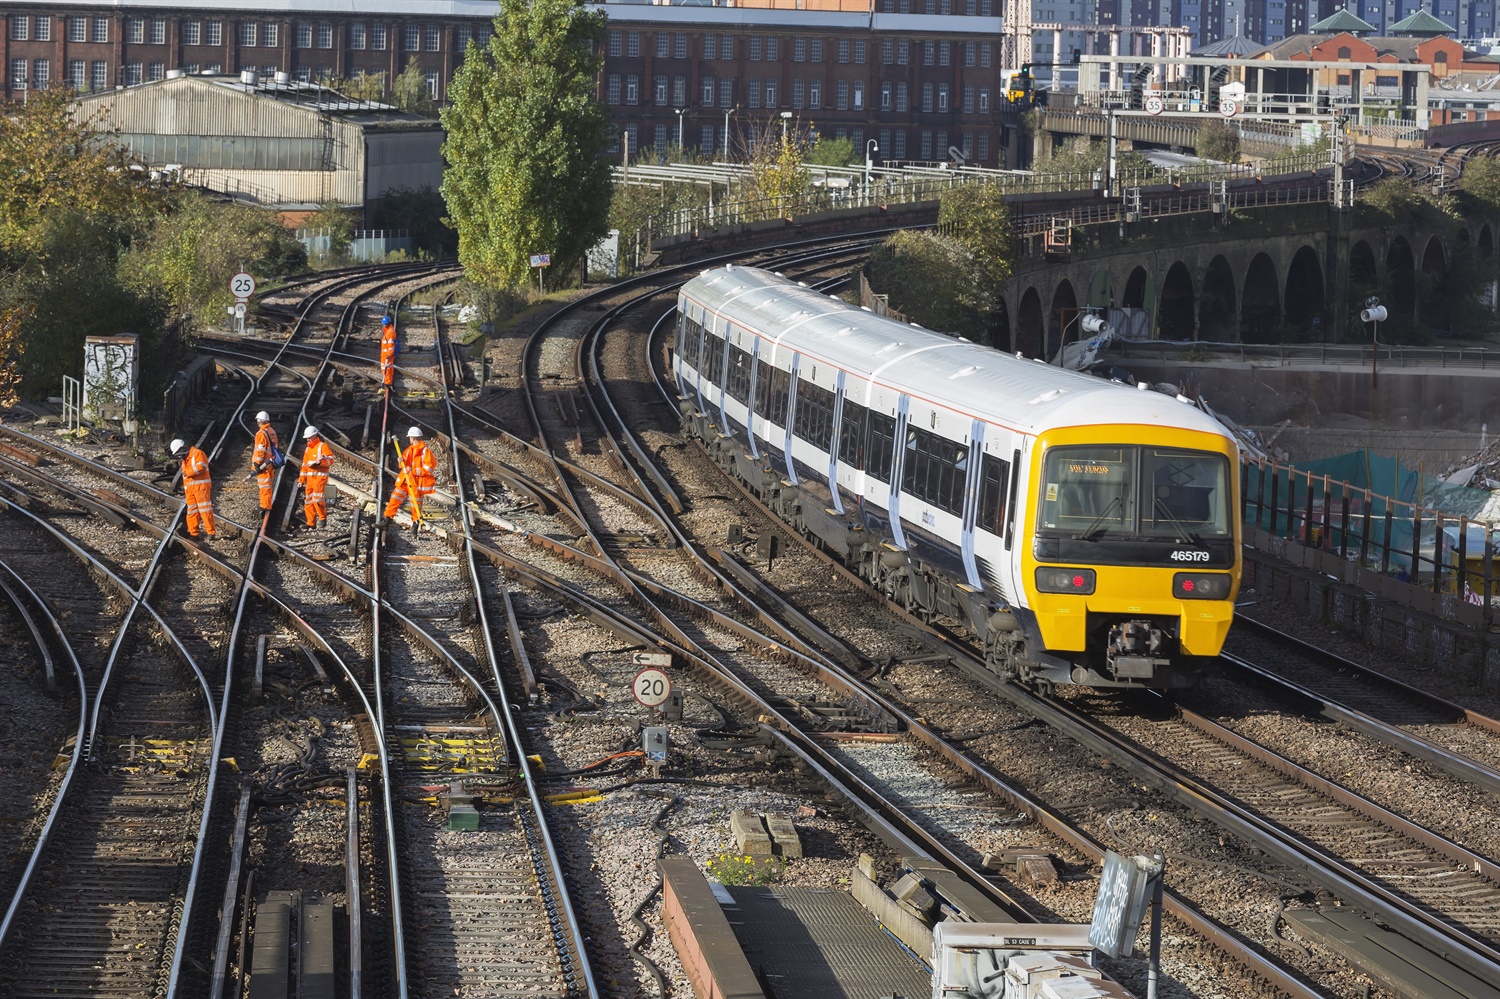 Train’s near miss with track workers caused by mix-up over location